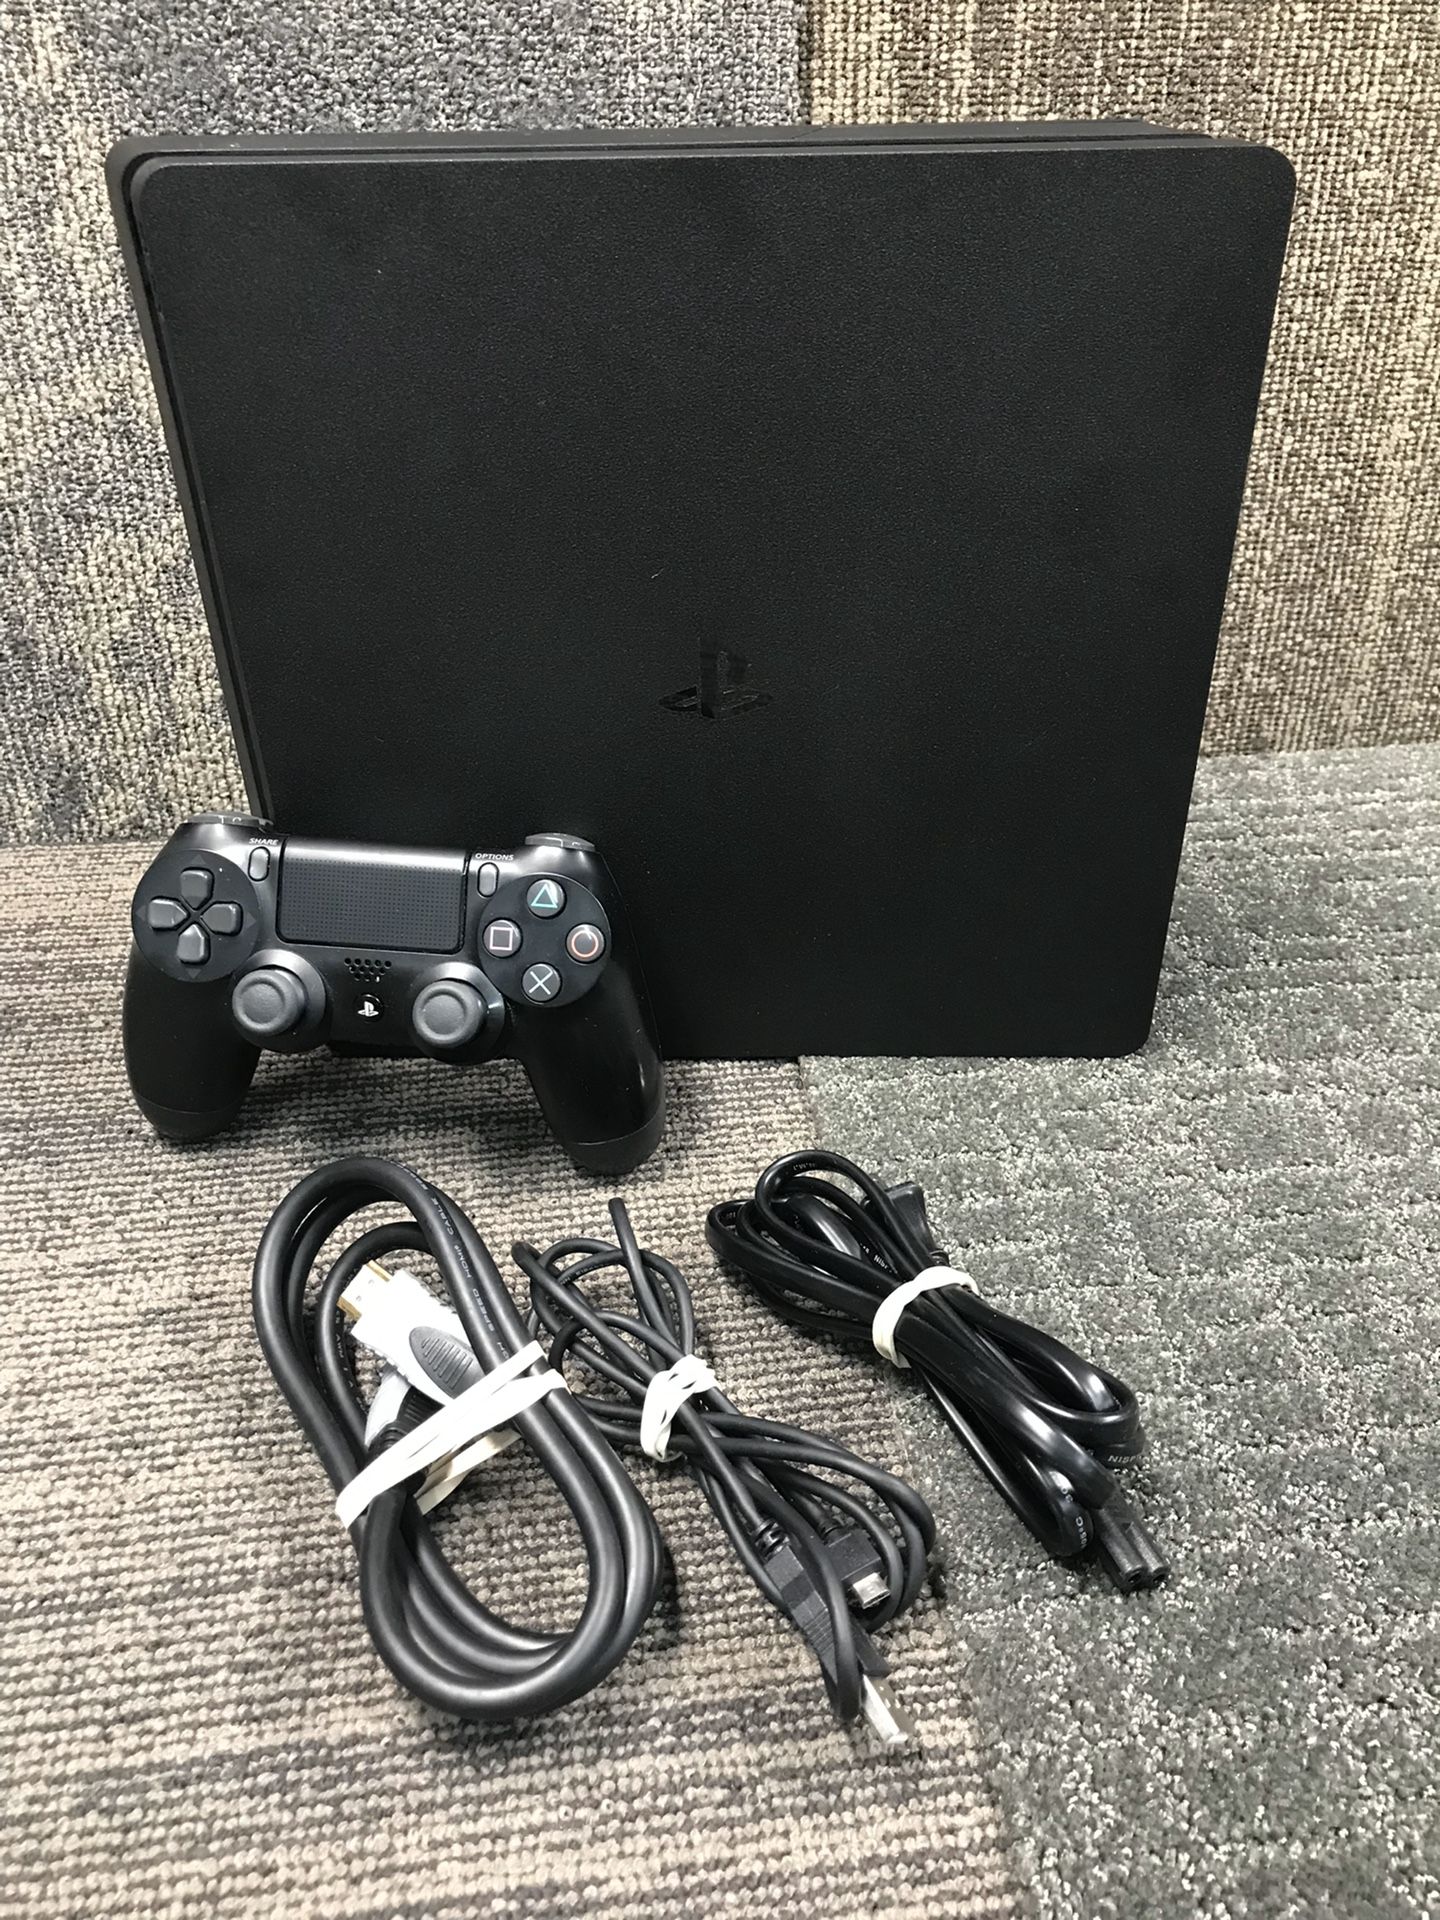 1Tb - PS4 Slim - Cables & Controller Included.